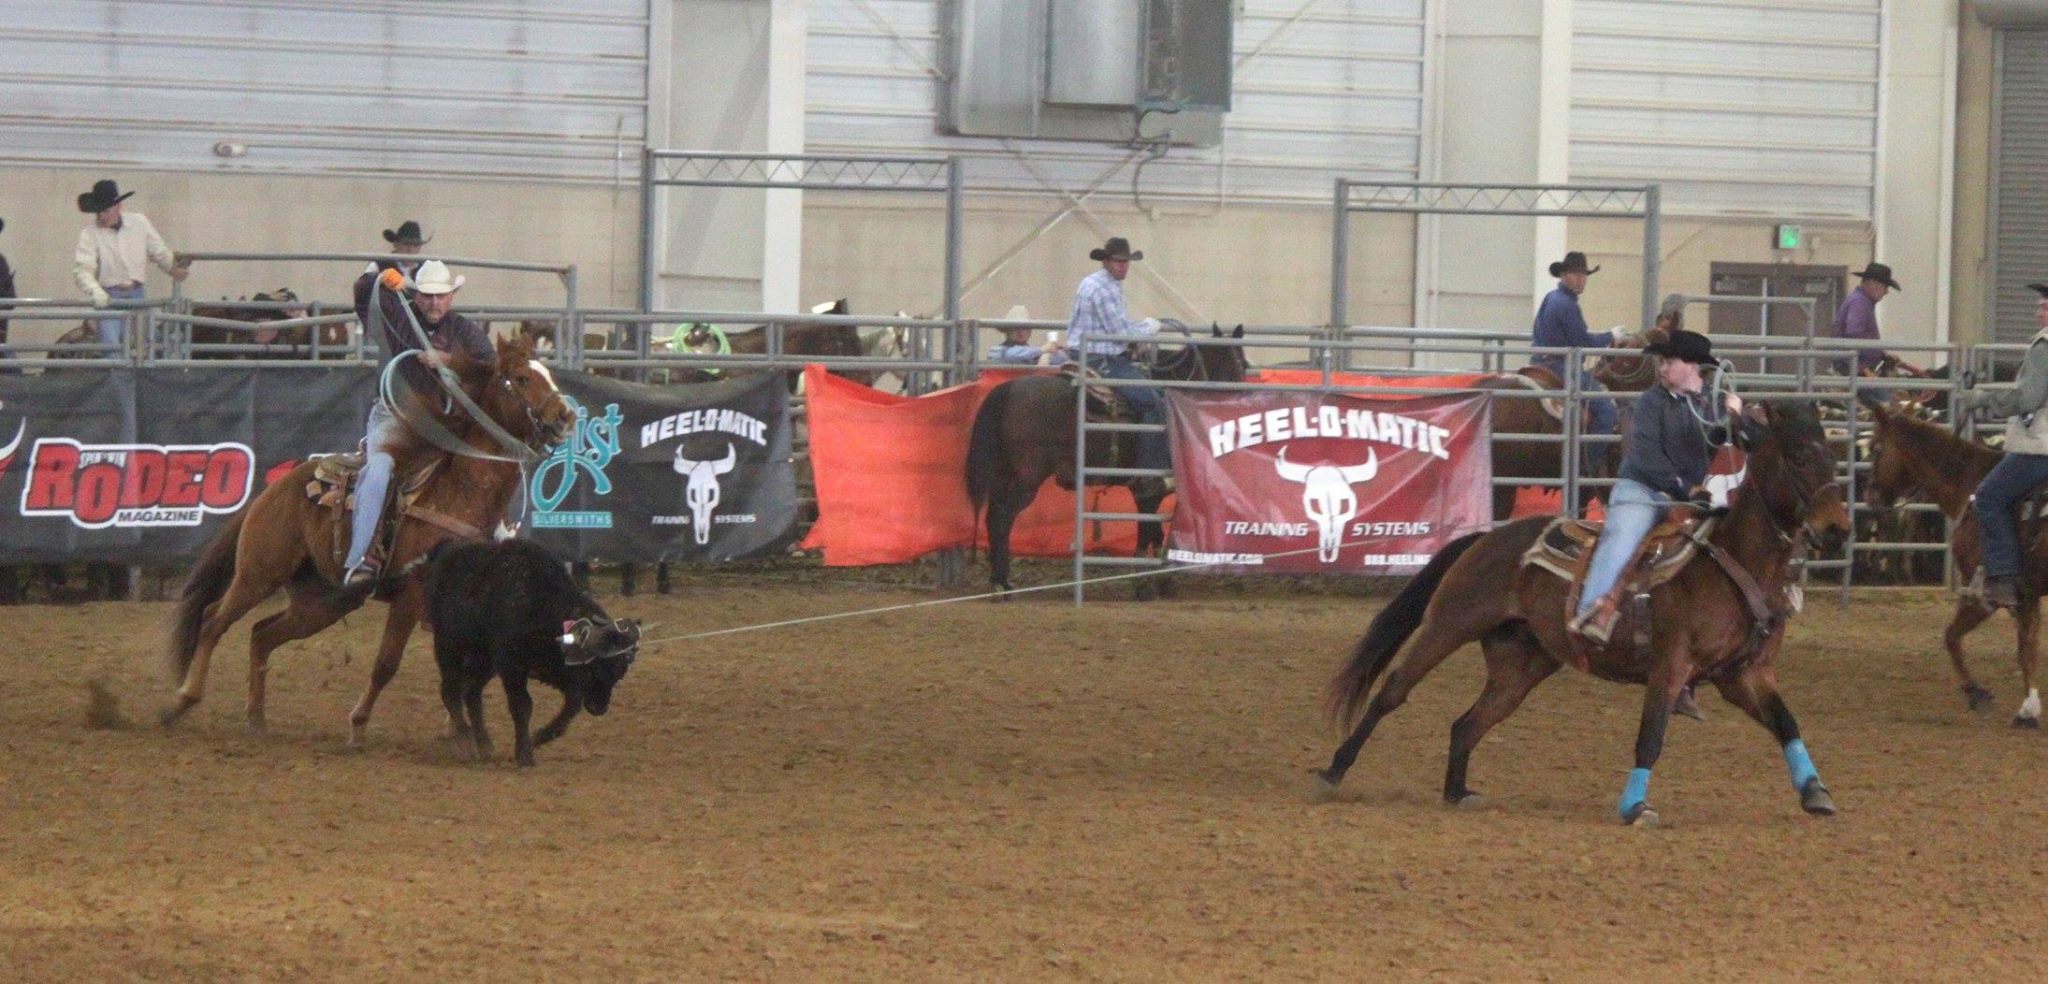 Taylor Rossenbach, header in this team roping photo, is the new coach of NCTA Aggie Rodeo. (Courtesy Photo)